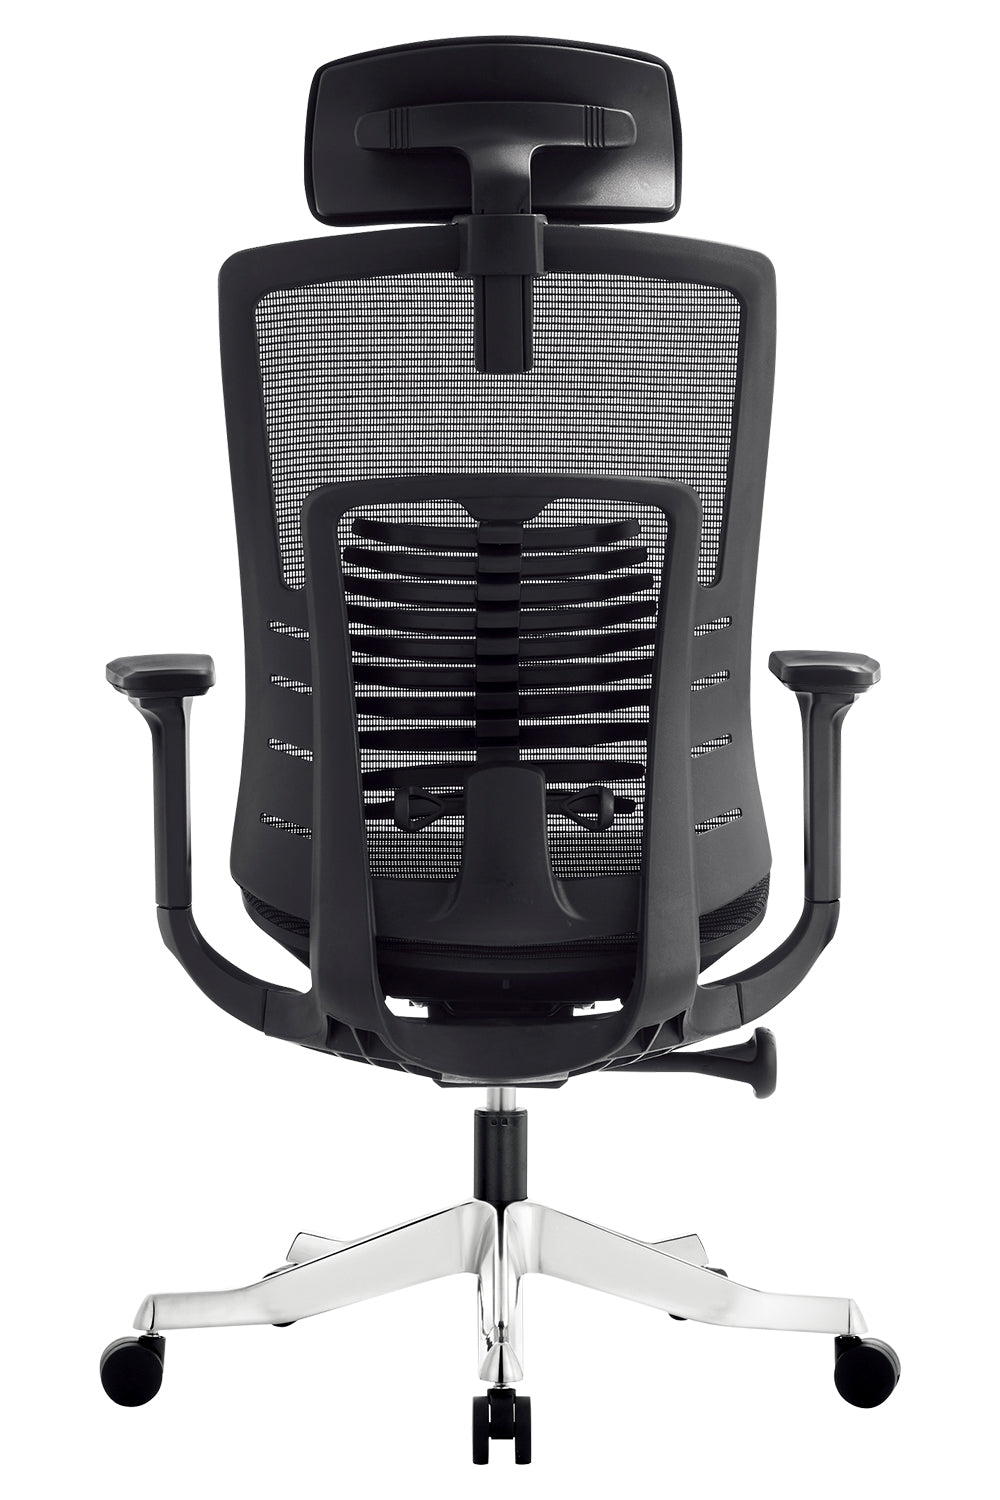 Apollo High Back 3D Workstation Swivel Chair with Mesh Seat And Aluminum die cast Base  - Black